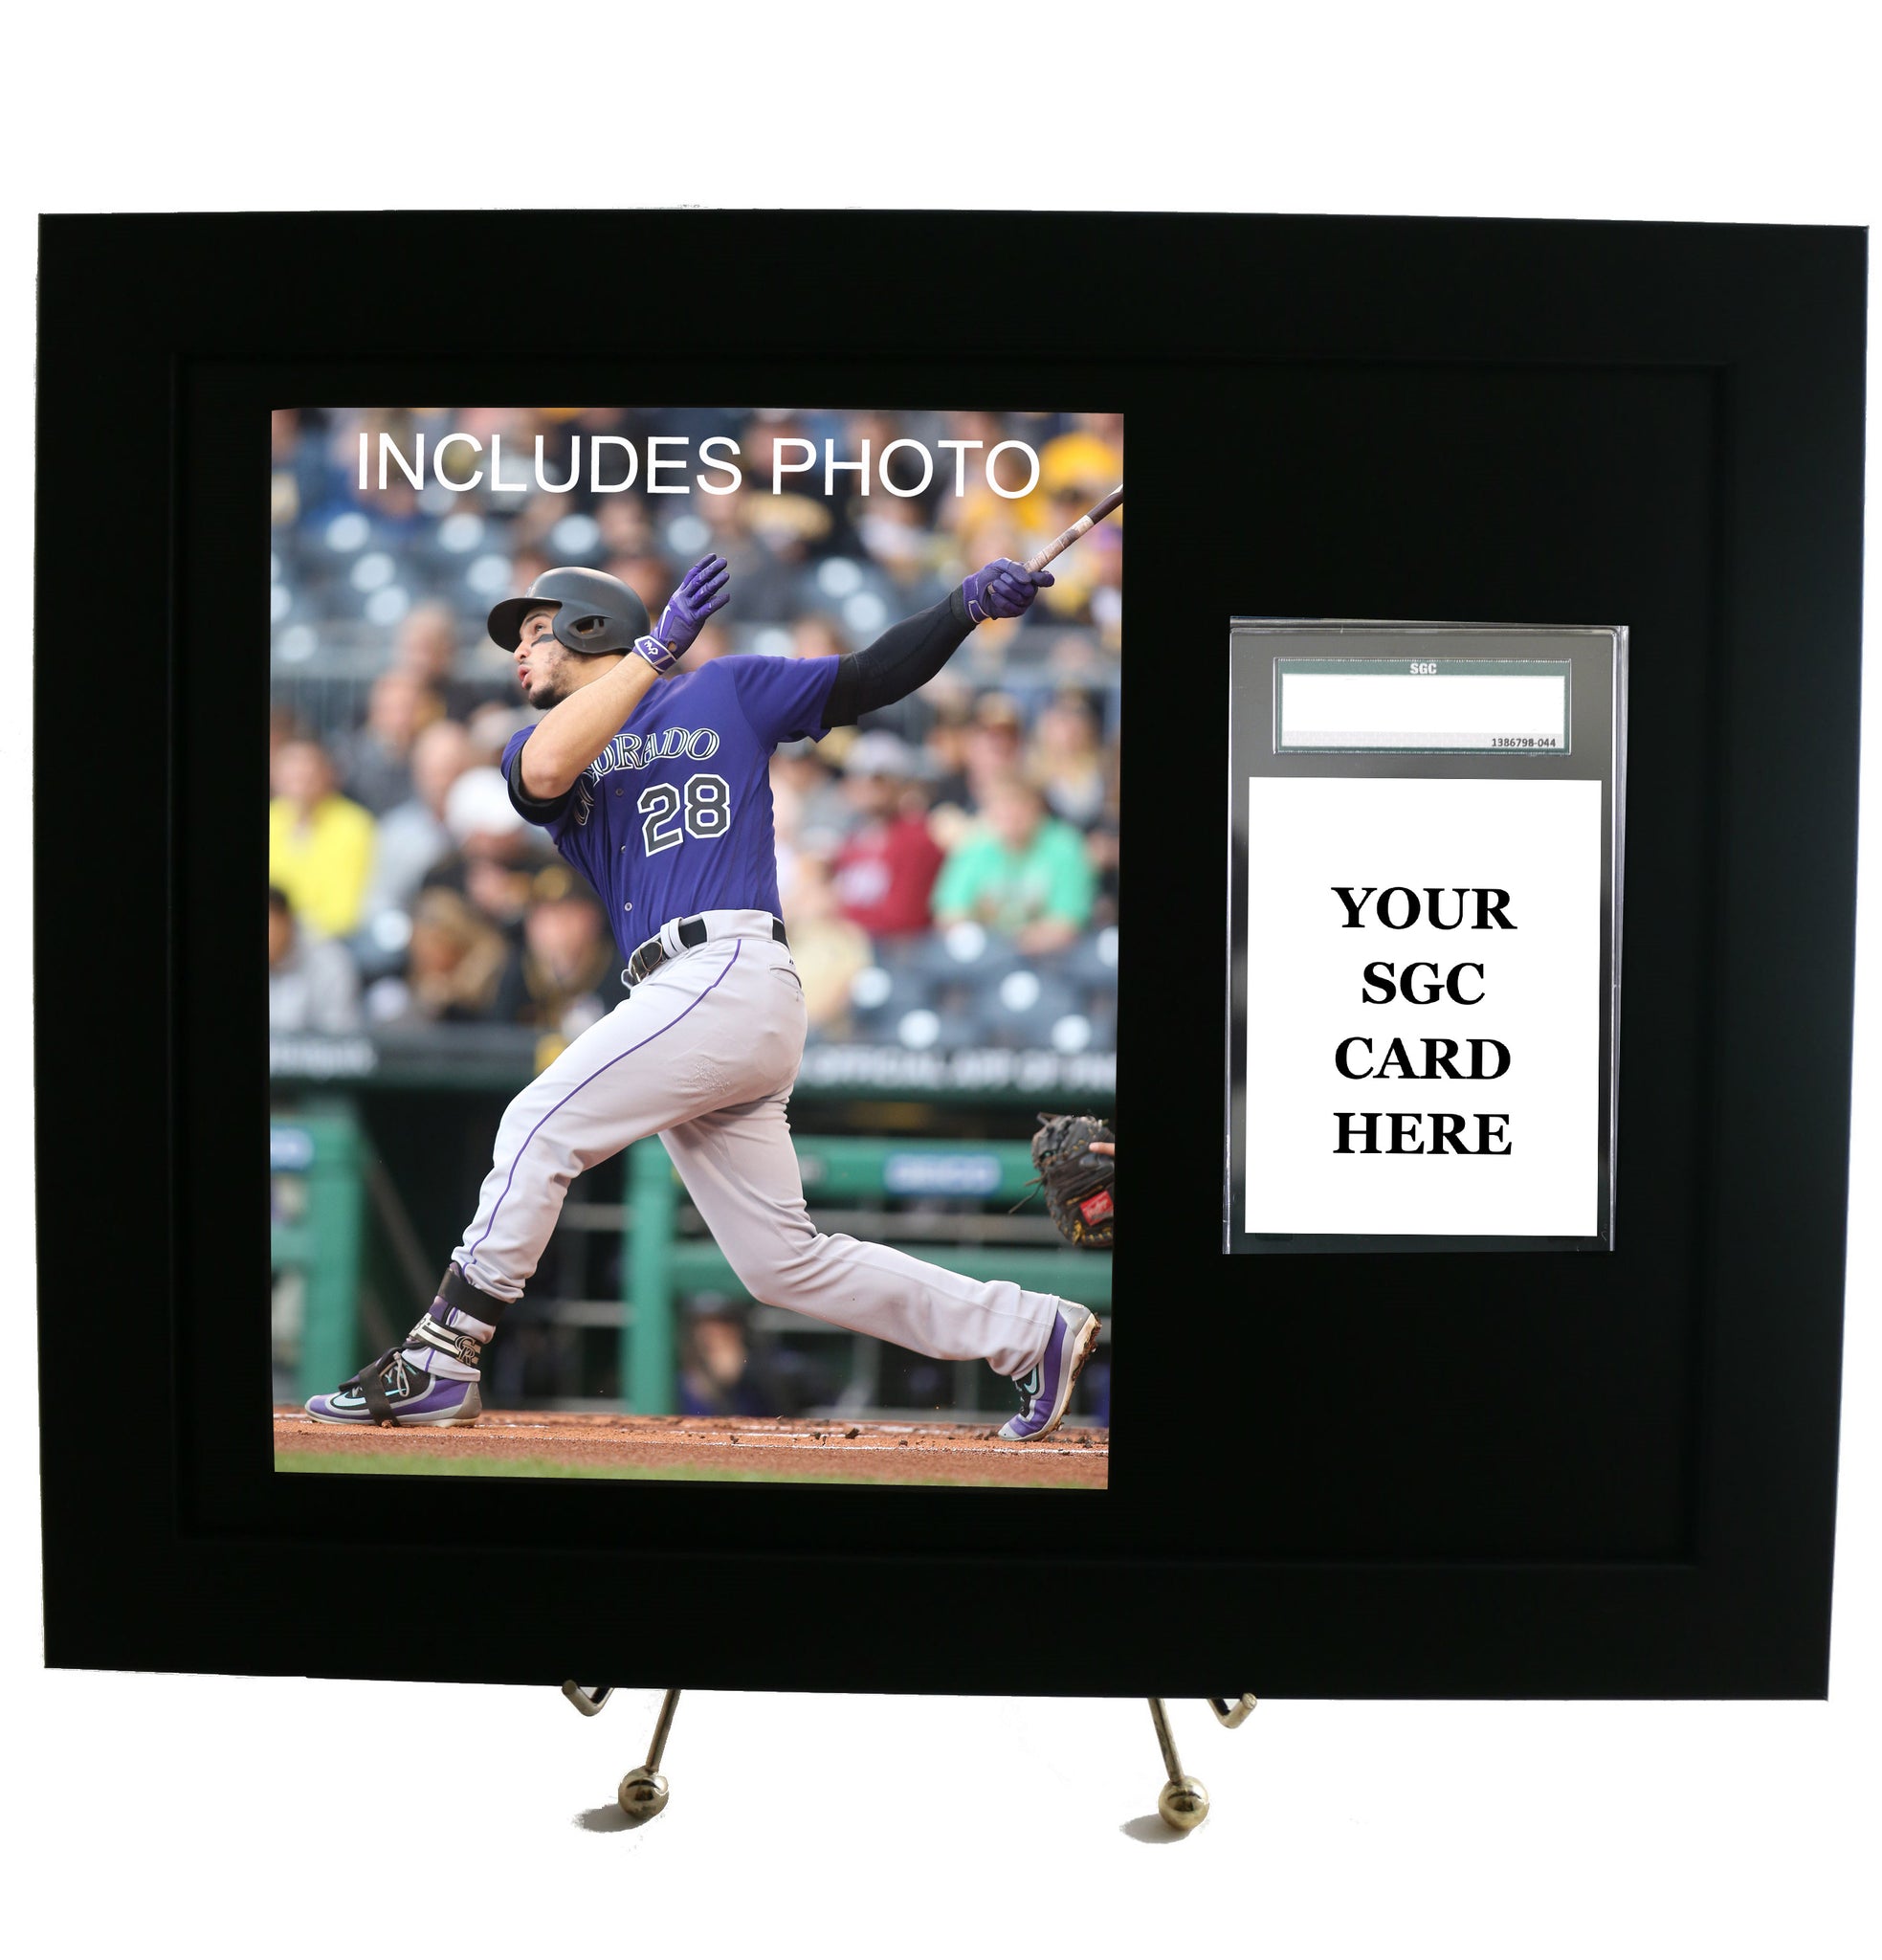 Sports Card Frame for YOUR SGC Graded Nolan Arenado Card (INCLUDES PHOTO) - Graded And Framed